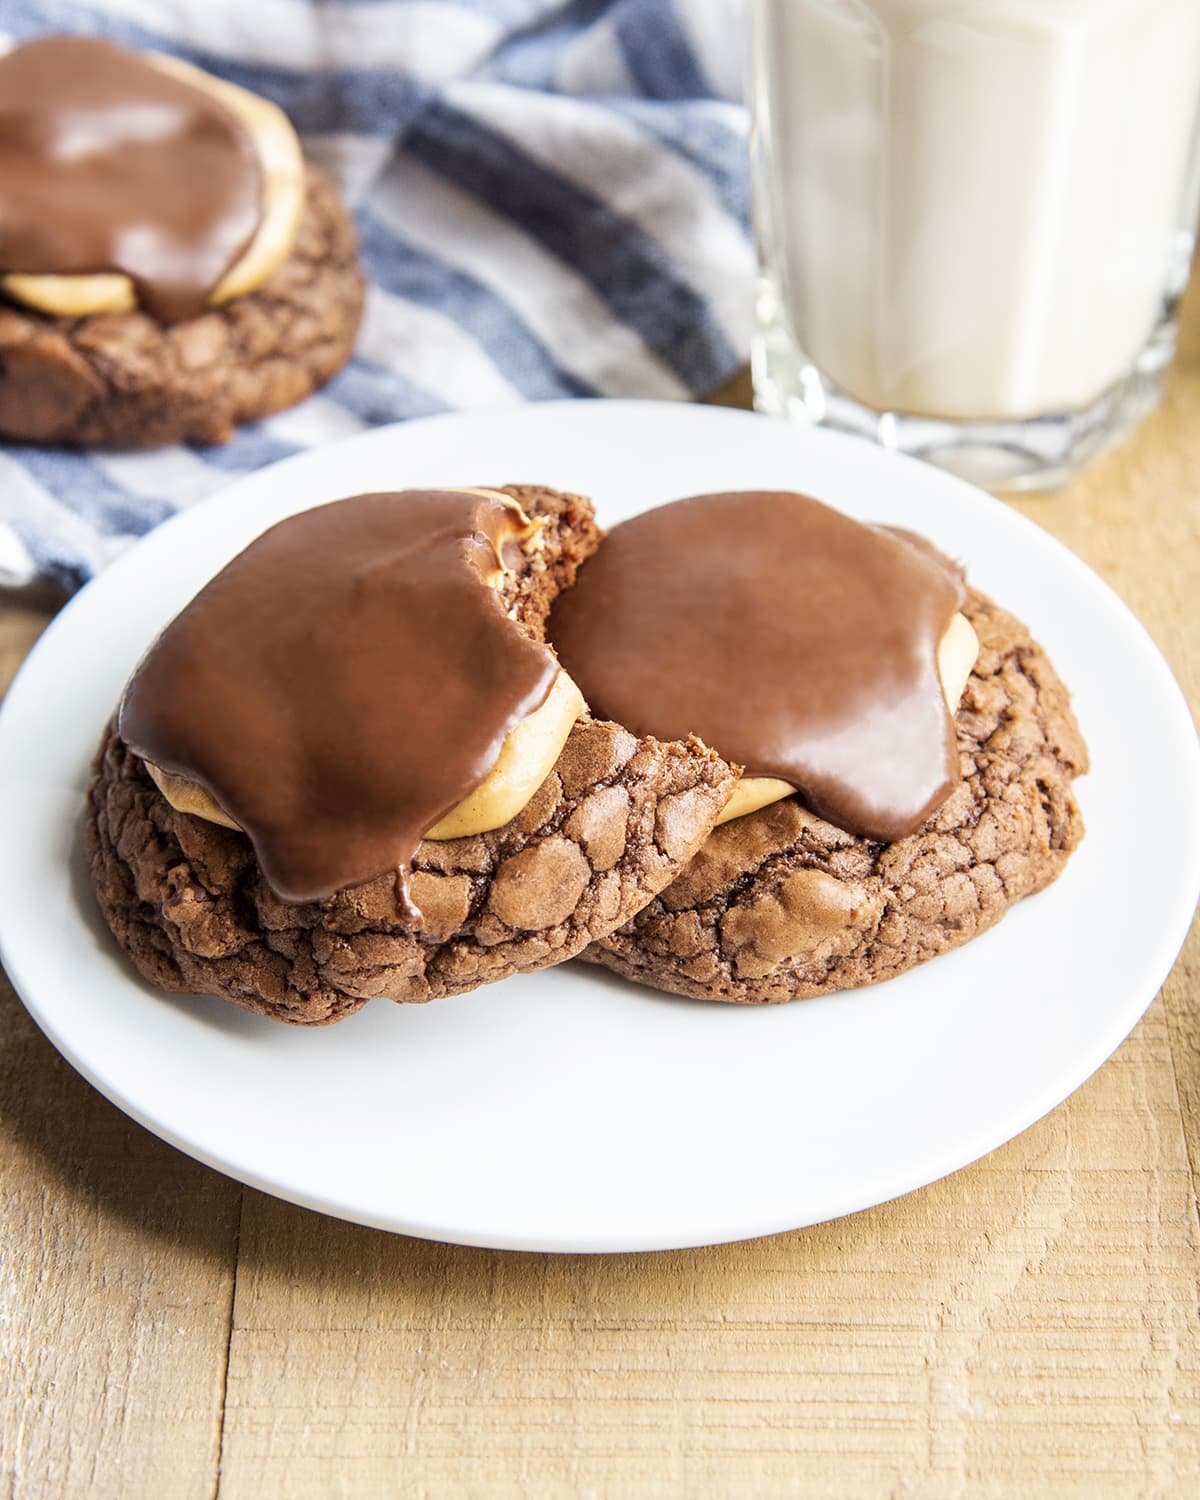 A plate with two buckeye brownie cookies topped with peanut butter and chocolate. One cookie has a bite out of it.